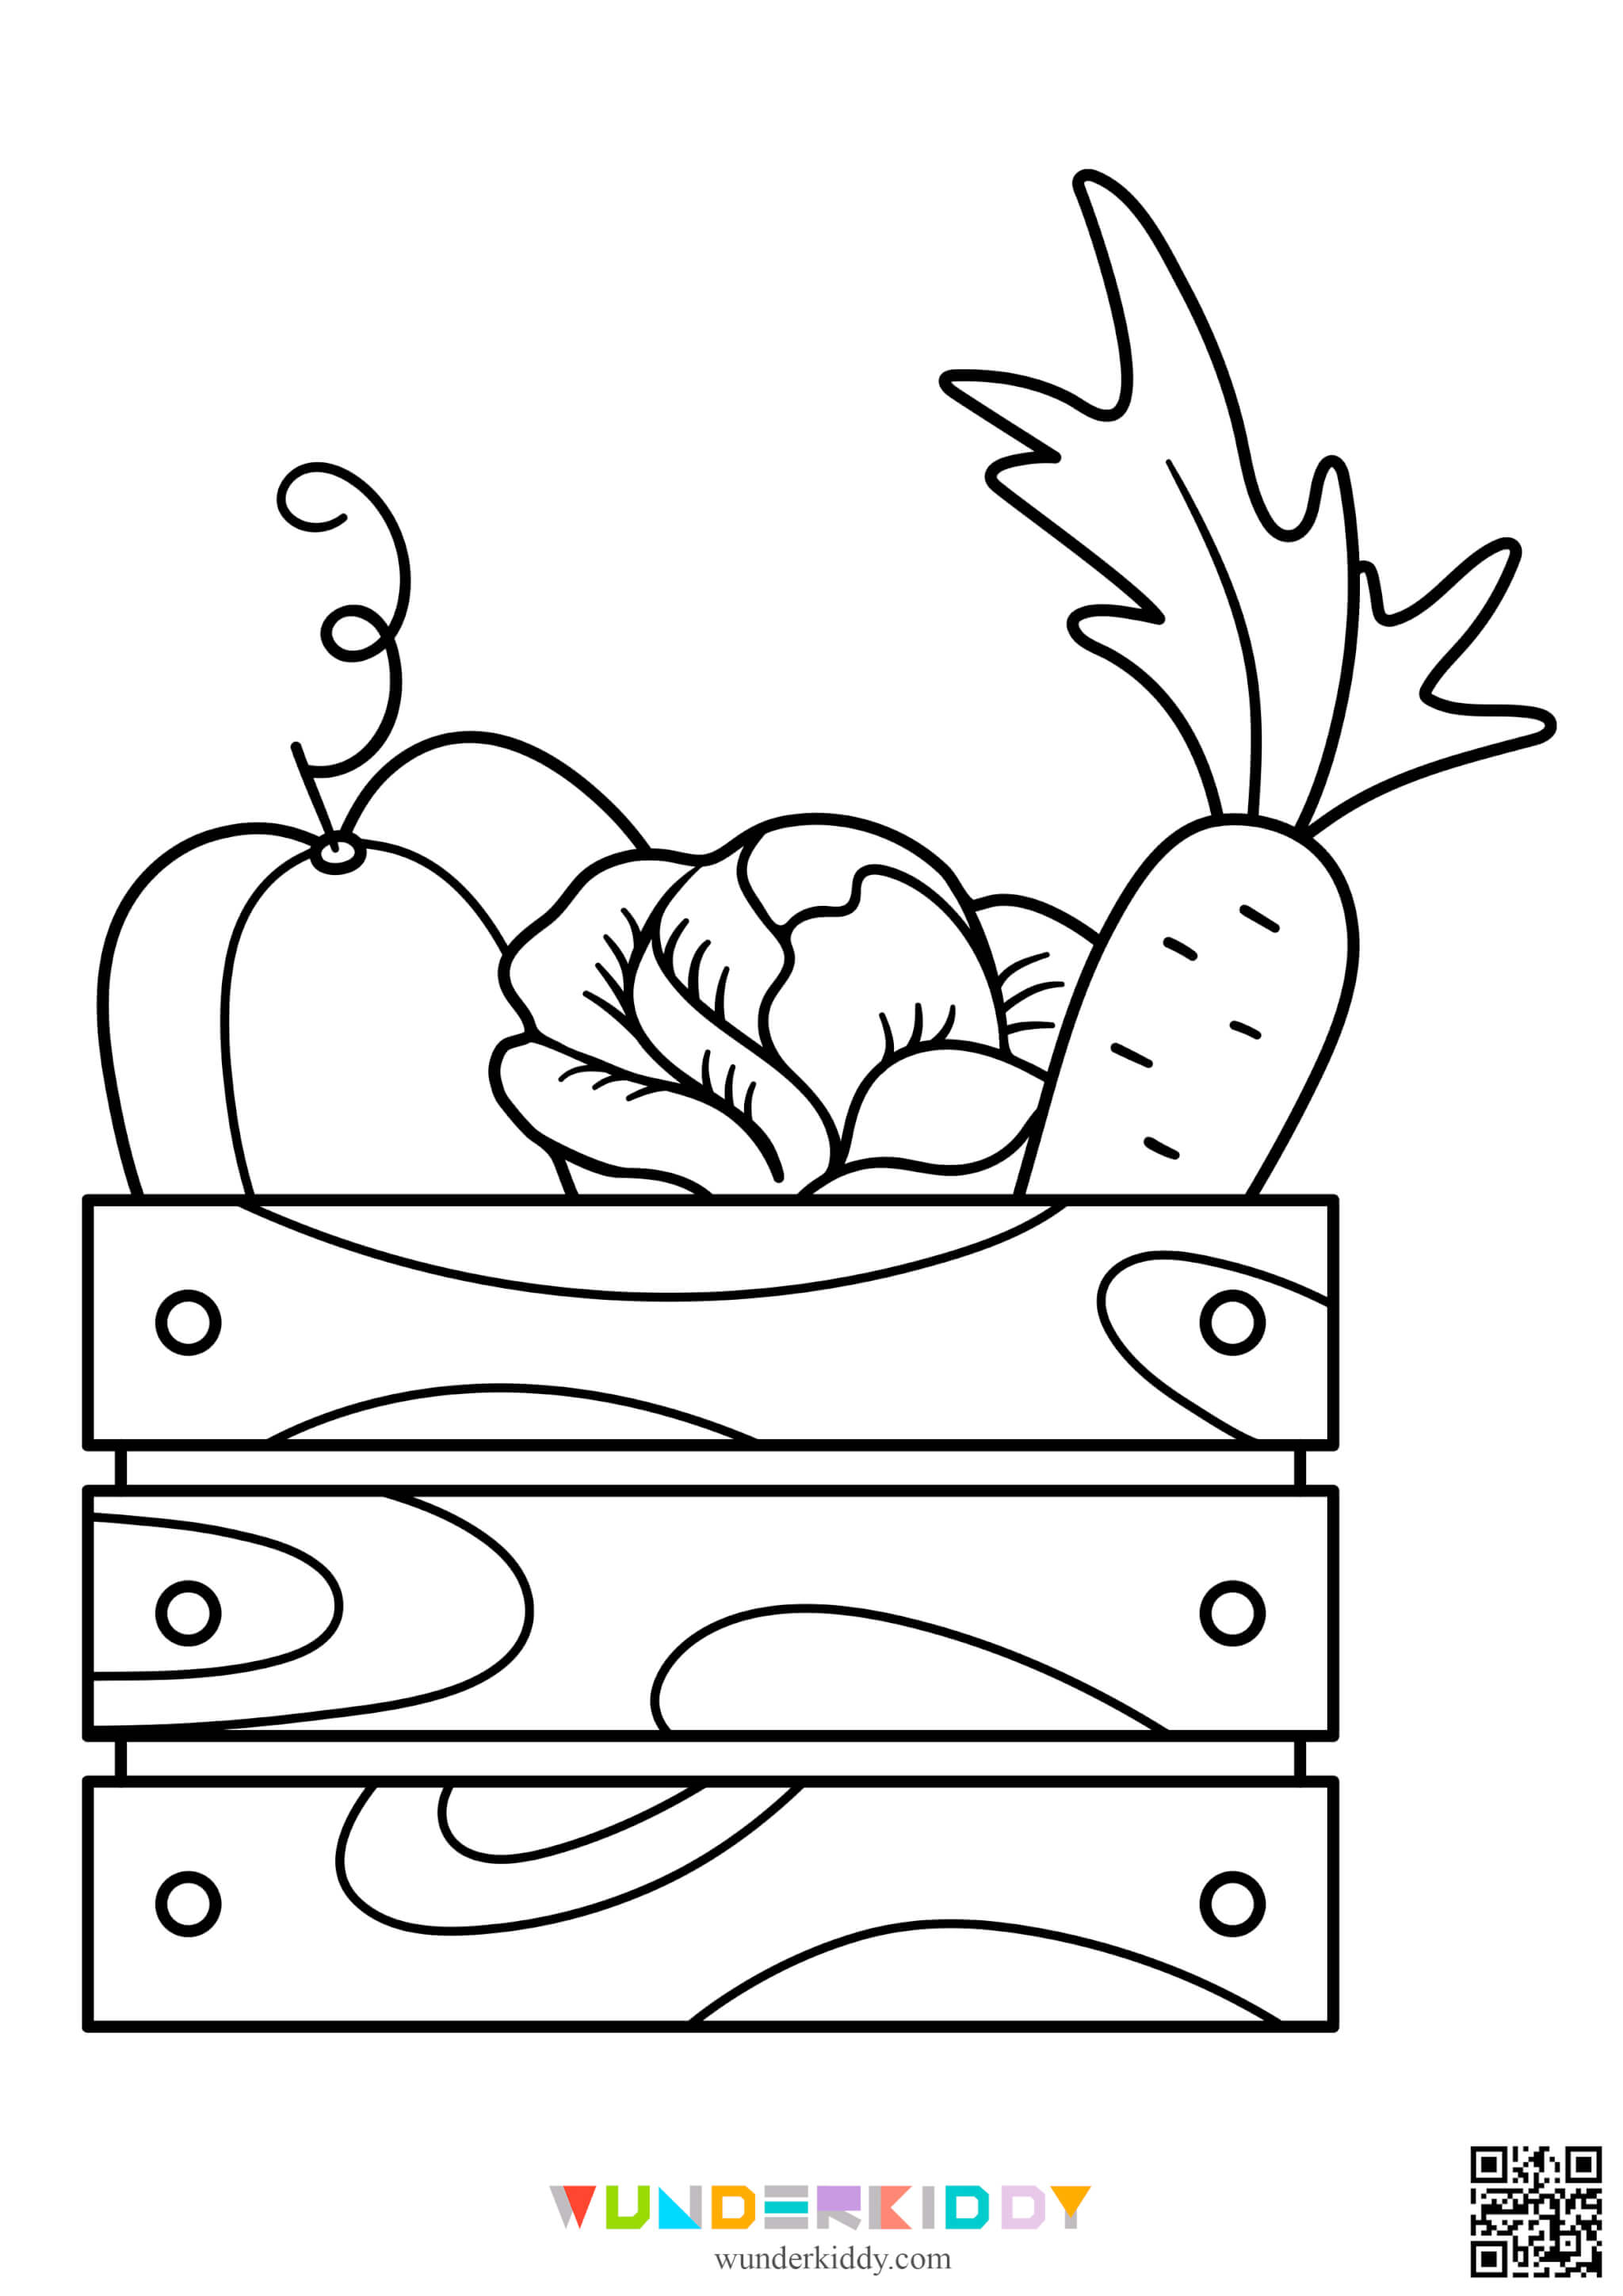 Fall Coloring Pages - Image 25